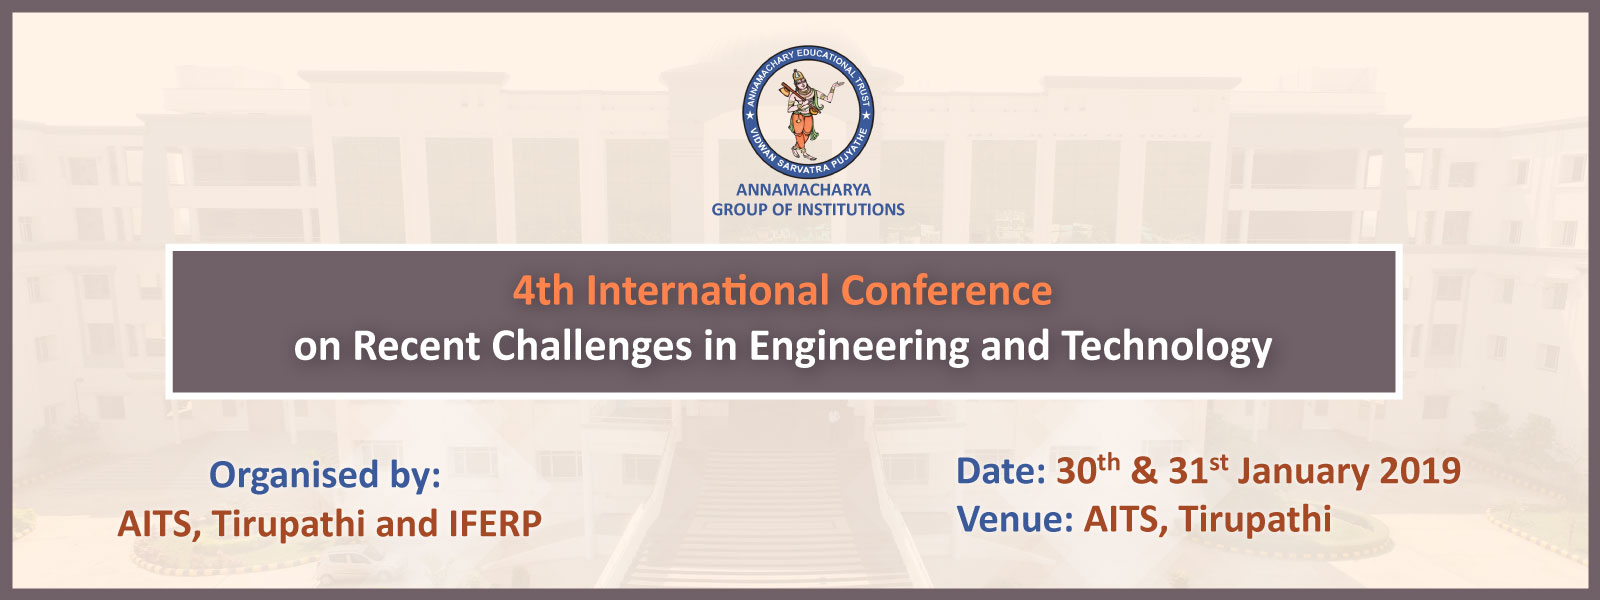 4th ICRCET on 30th and 31st January 2019 at AITS, Tirupathi